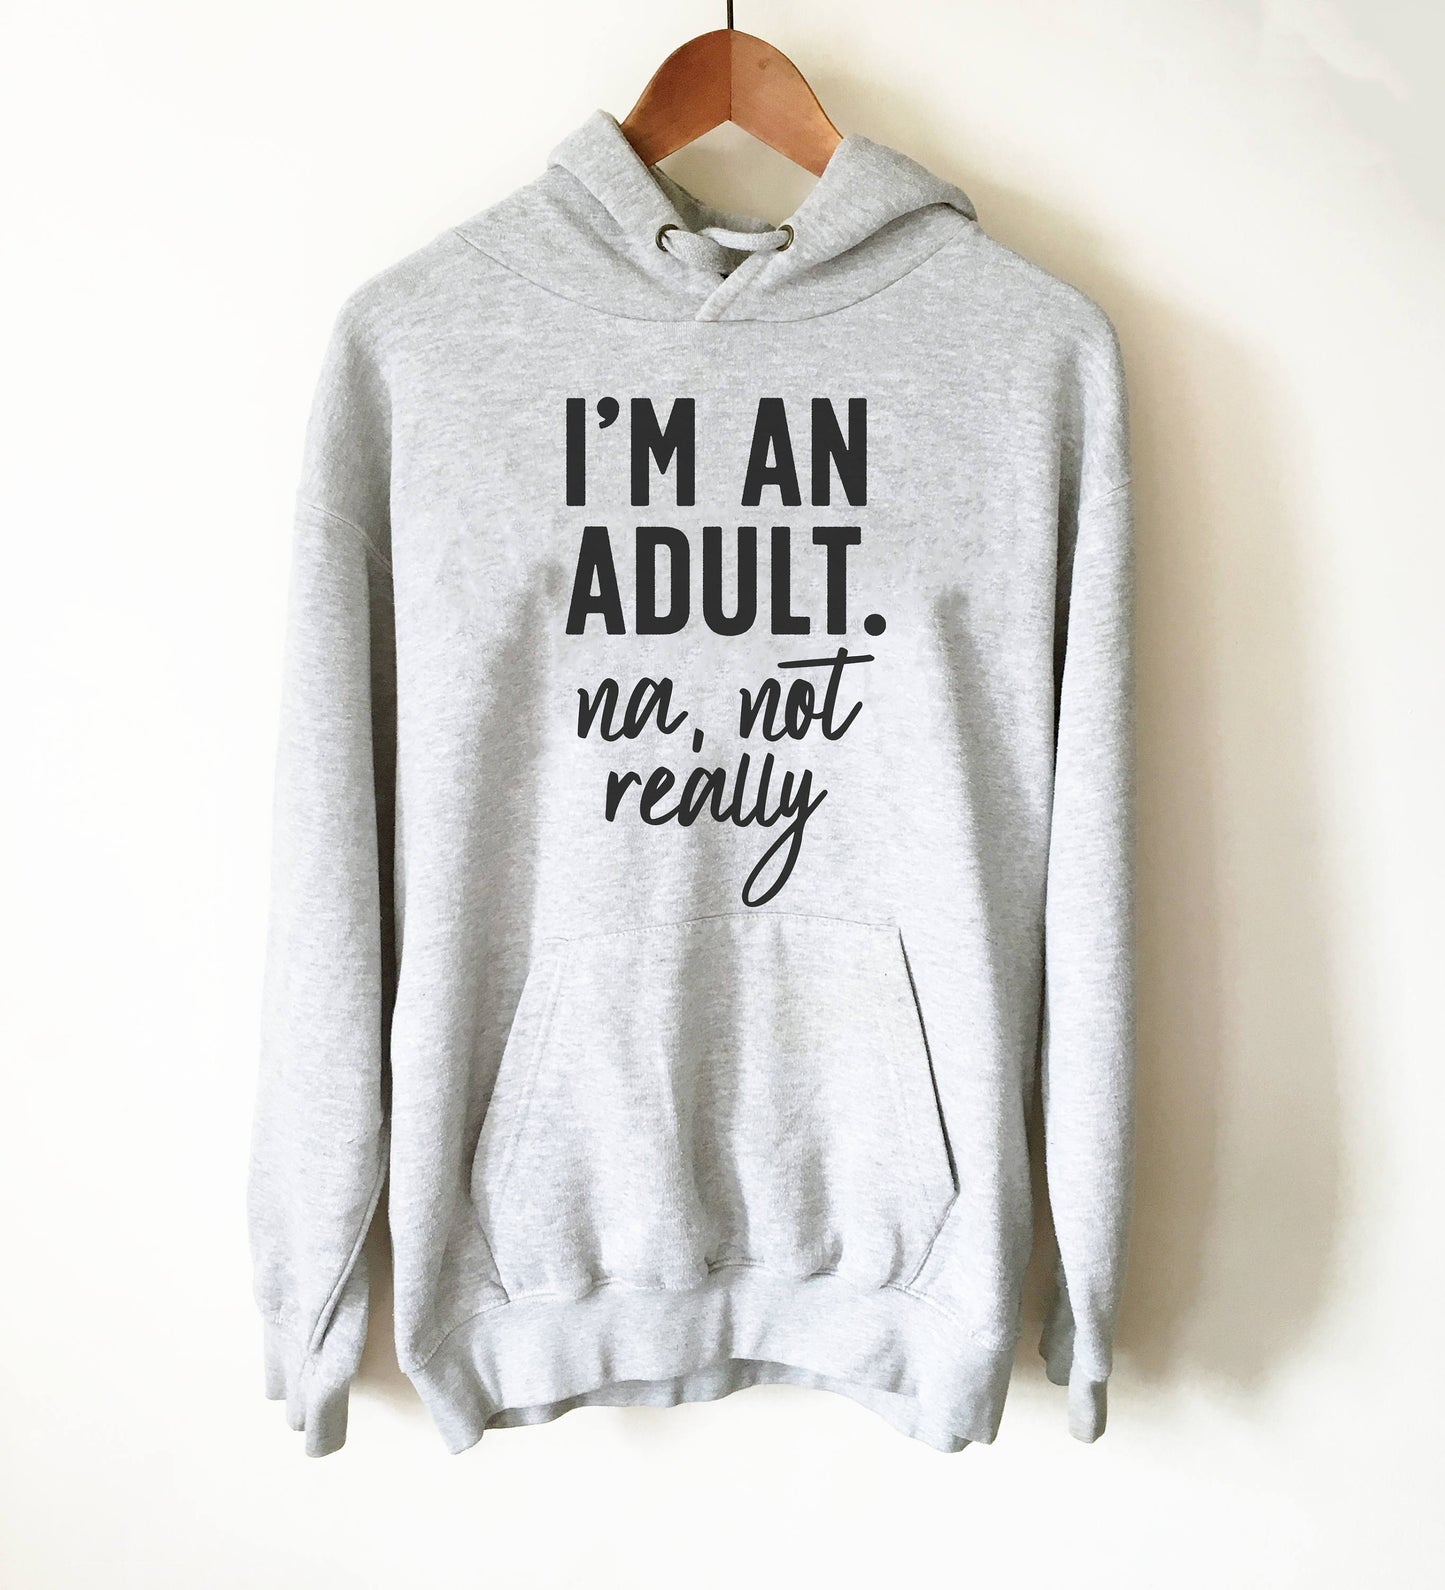 I'm An Adult Nah, Not Really Hoodie - 21st birthday shirt, Gift for her 18th, Birthday gift, Gift for 18th